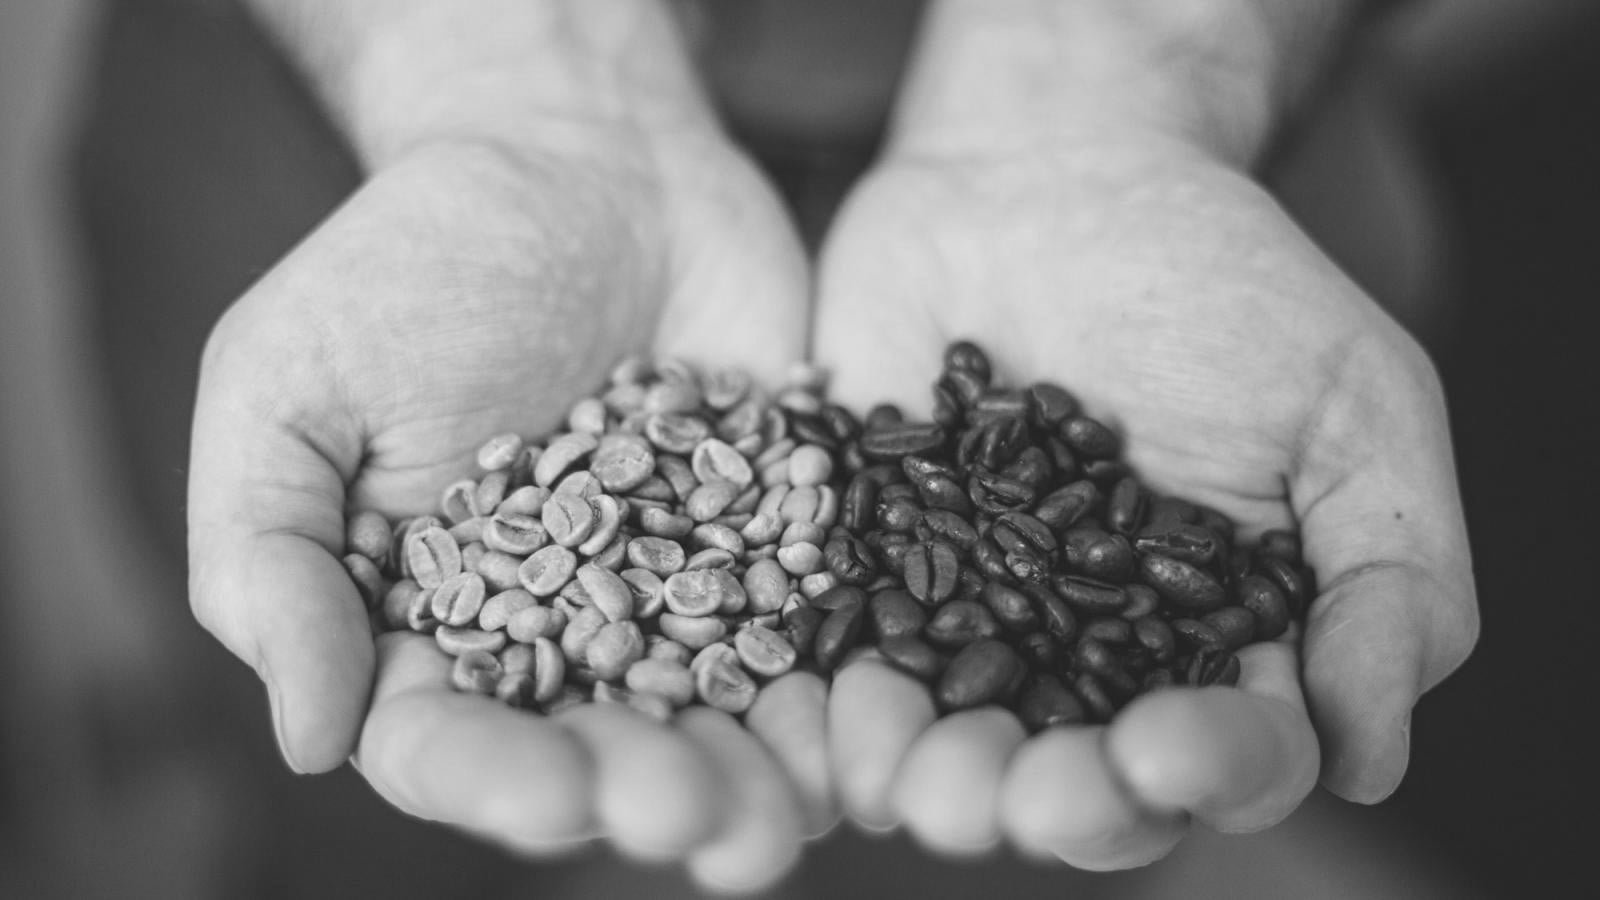 TIMELINE: A story of coffee